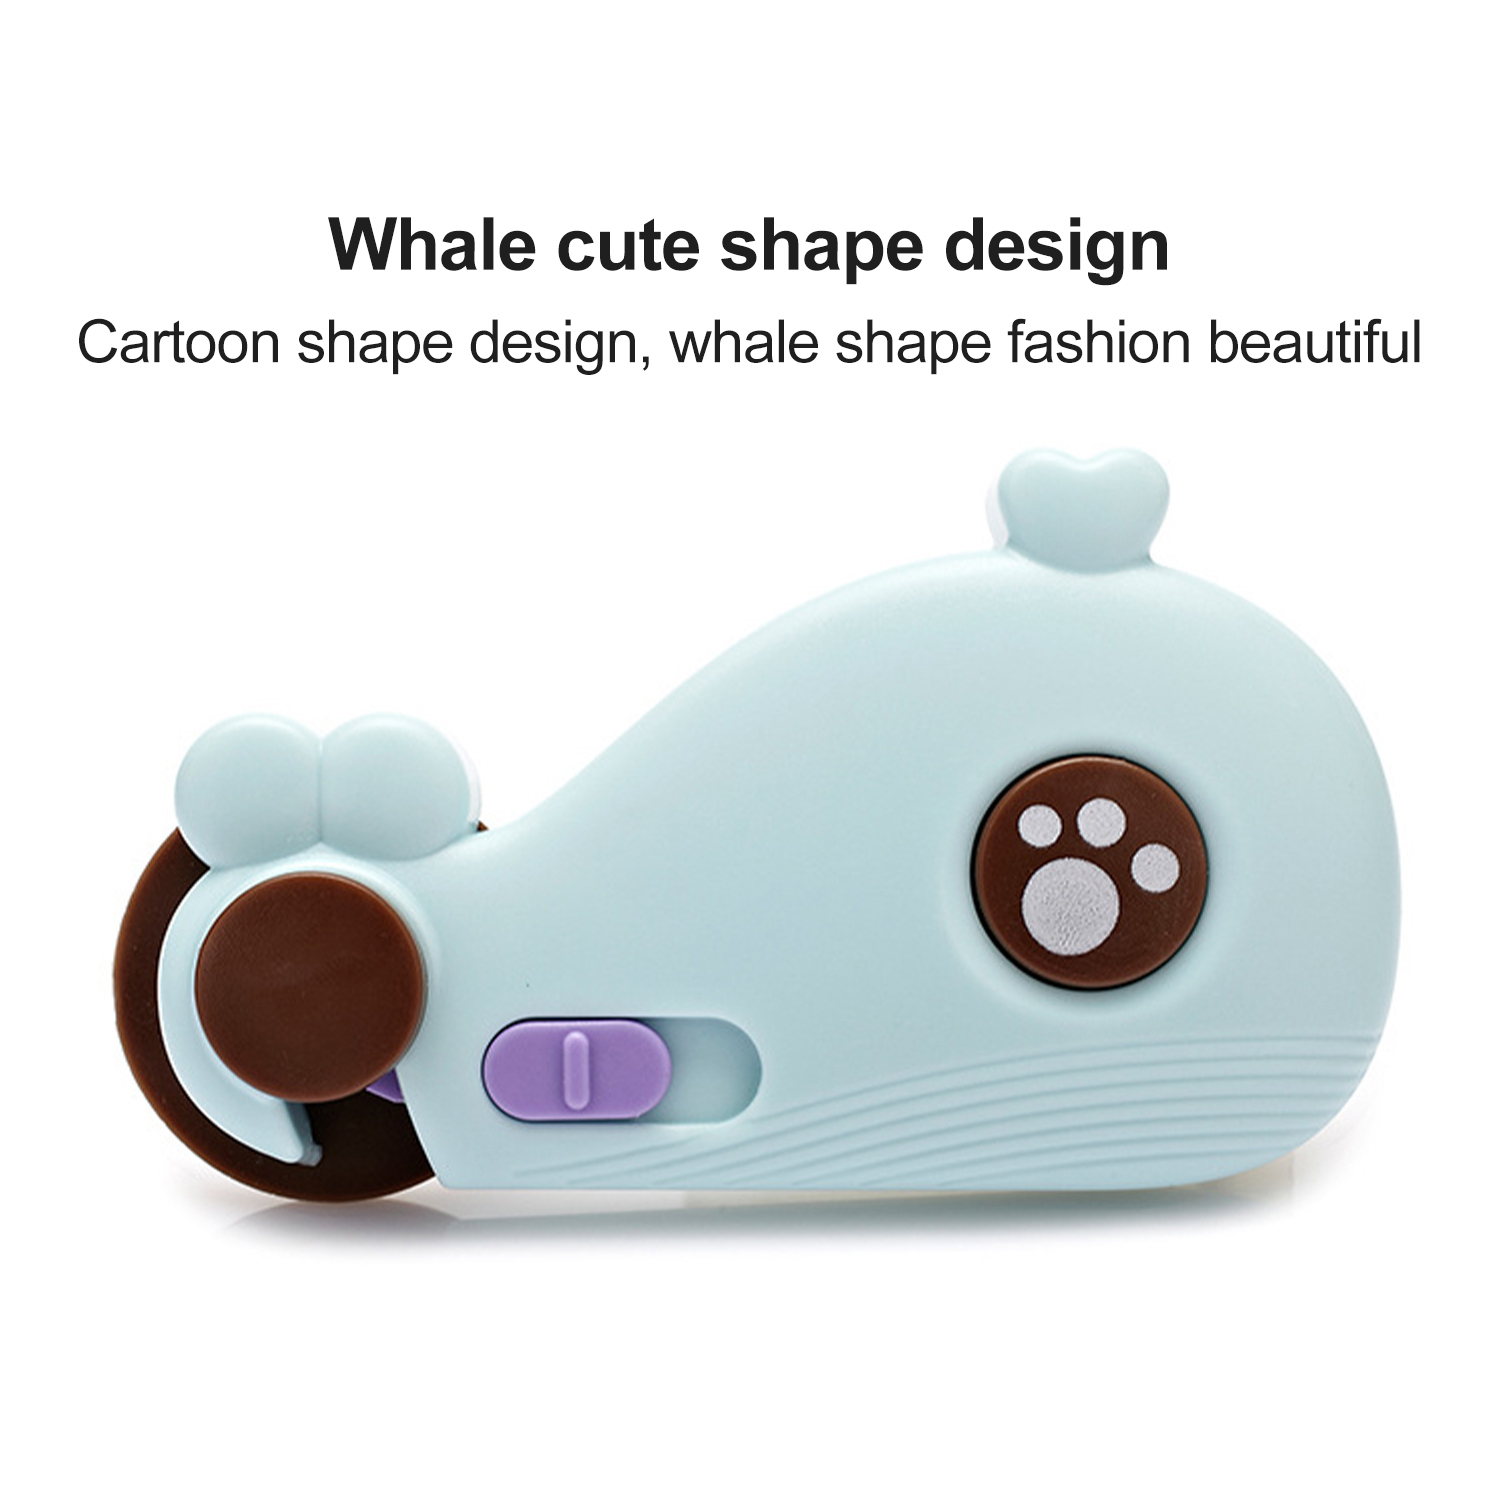 Multipurpose Child Safety Protection Equipment Whale Protection Safety Lock